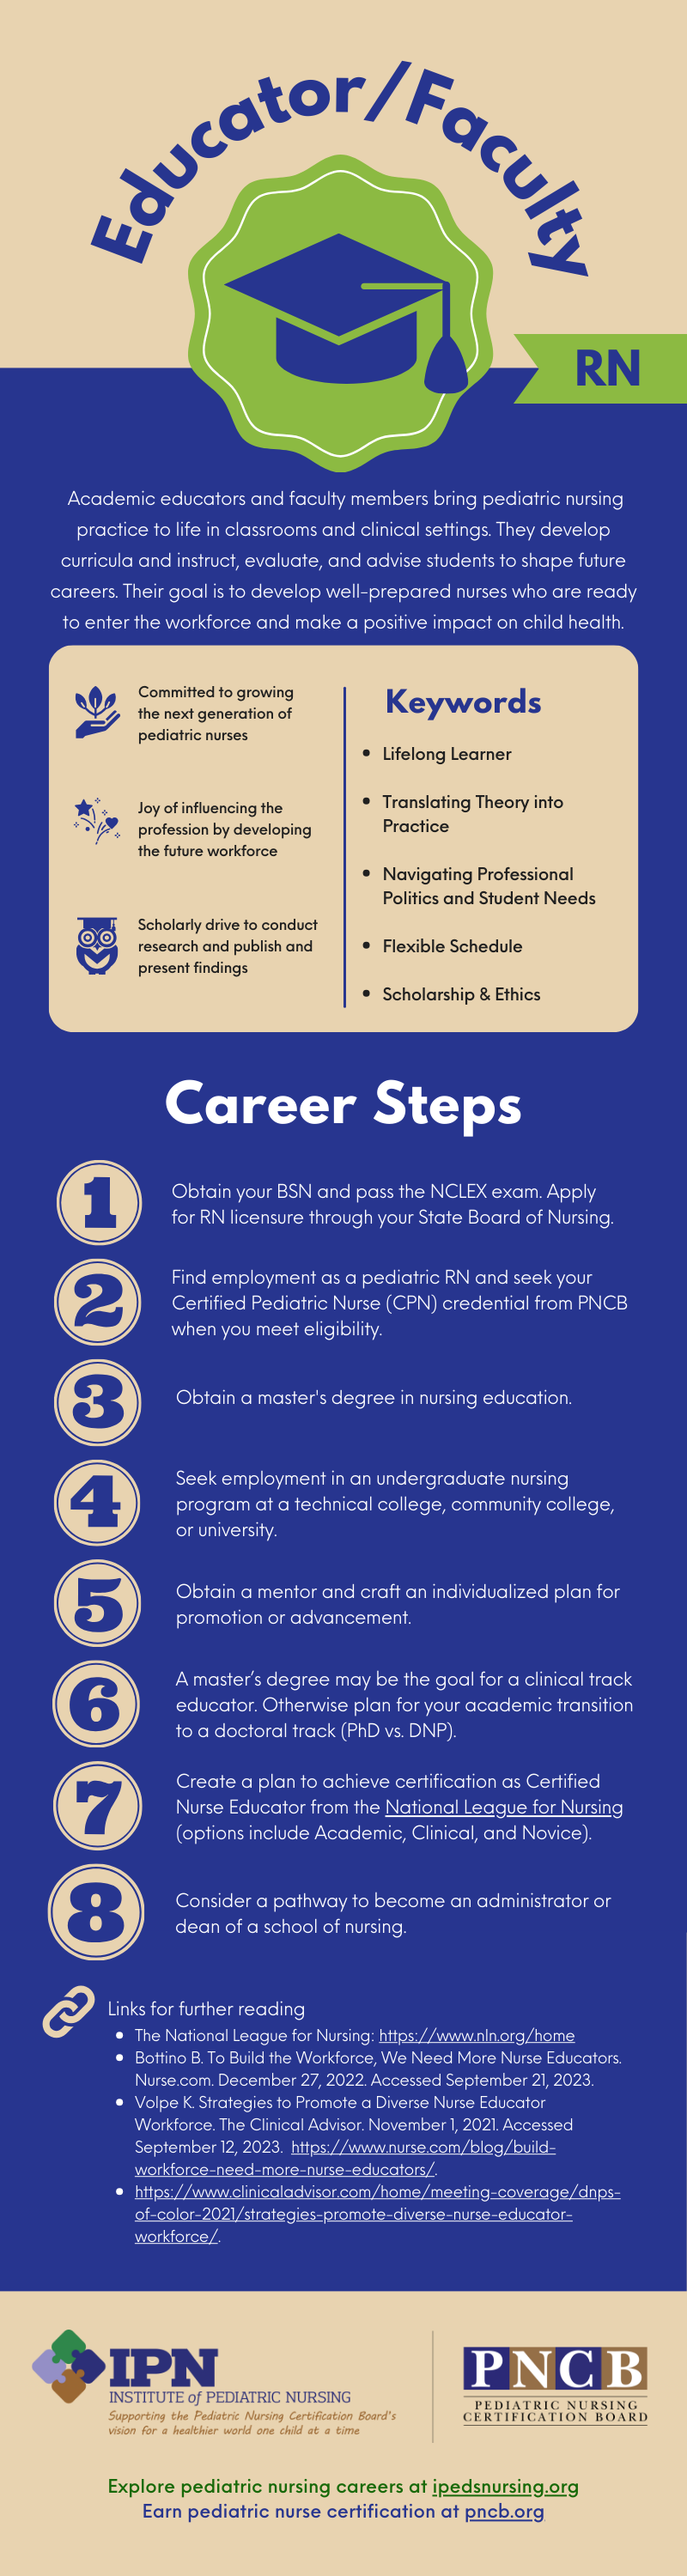 ID: Infographic describing steps to be an Educator/Faculty for RNs - see PDF for details